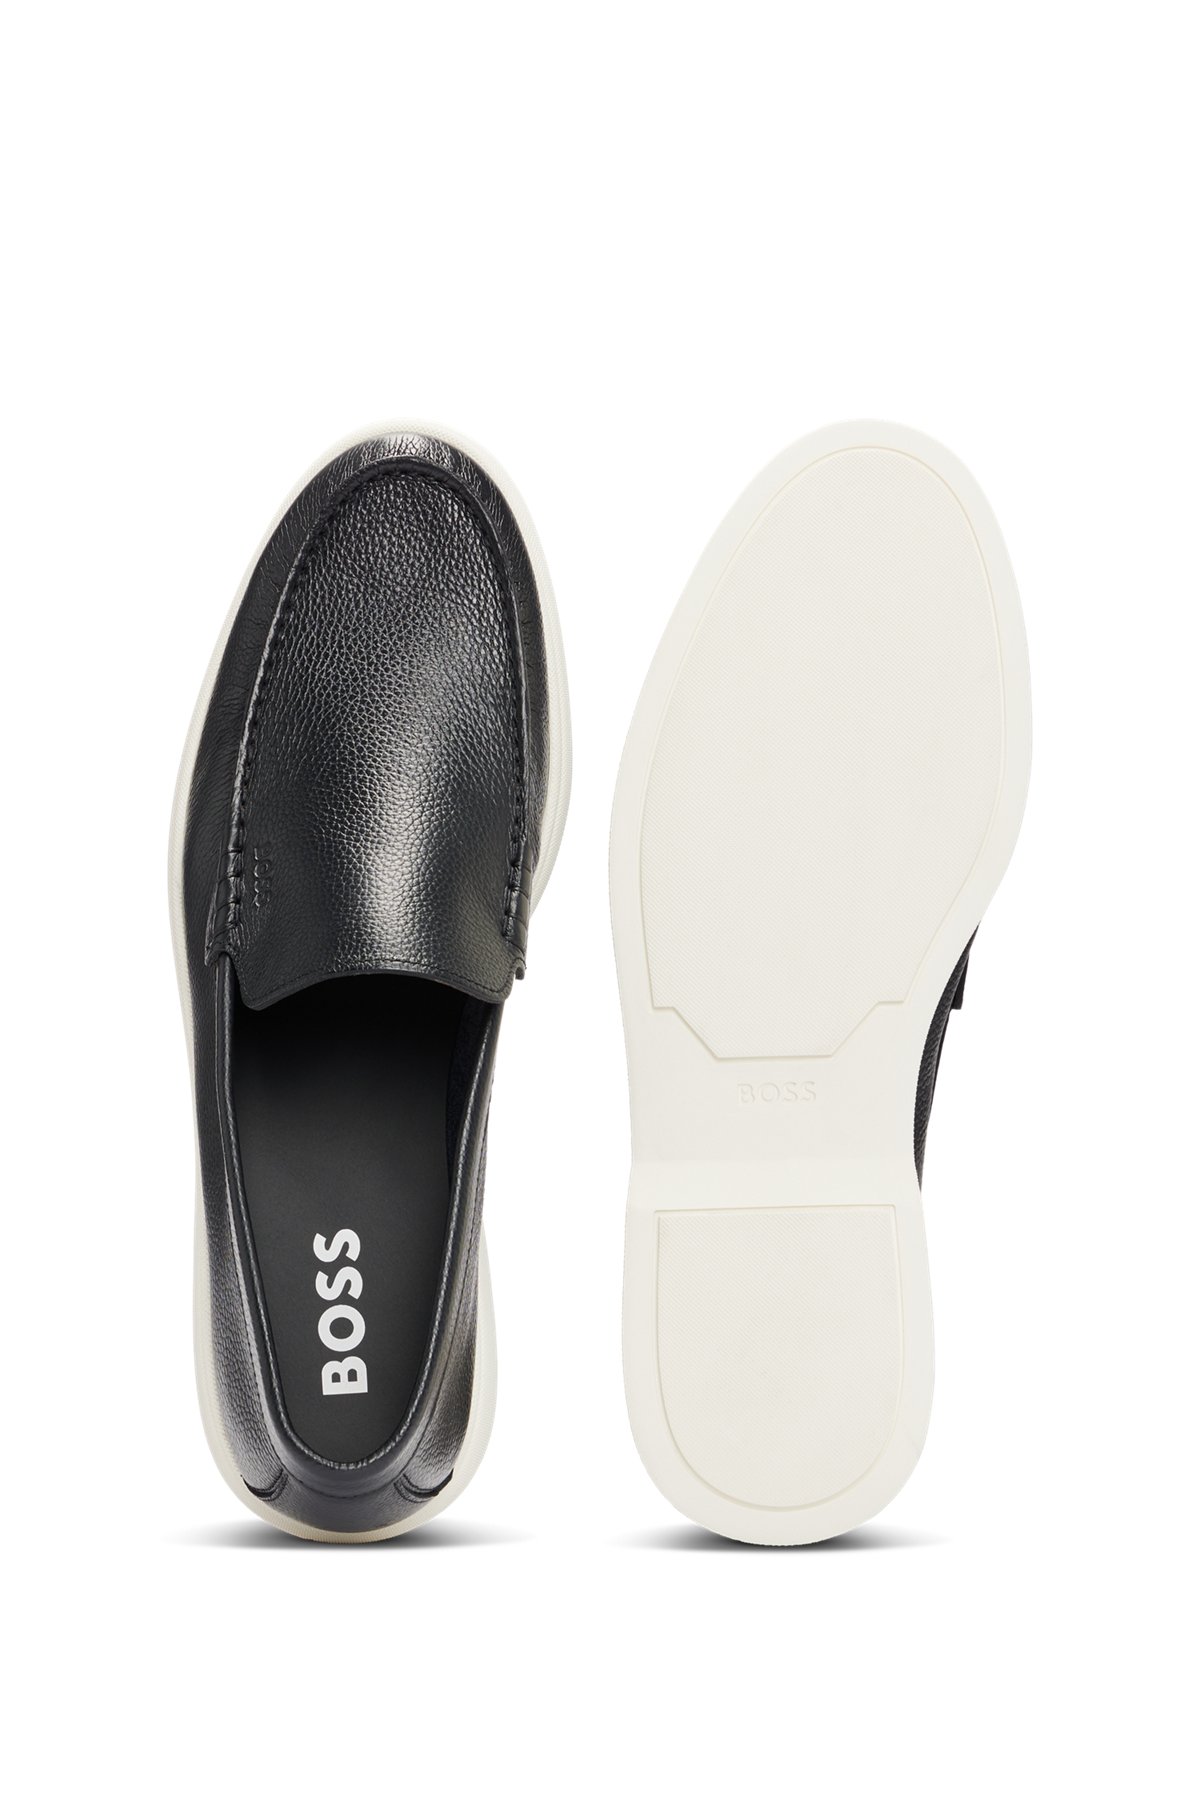 Tumbled-leather loafers with contrast outsole, Black